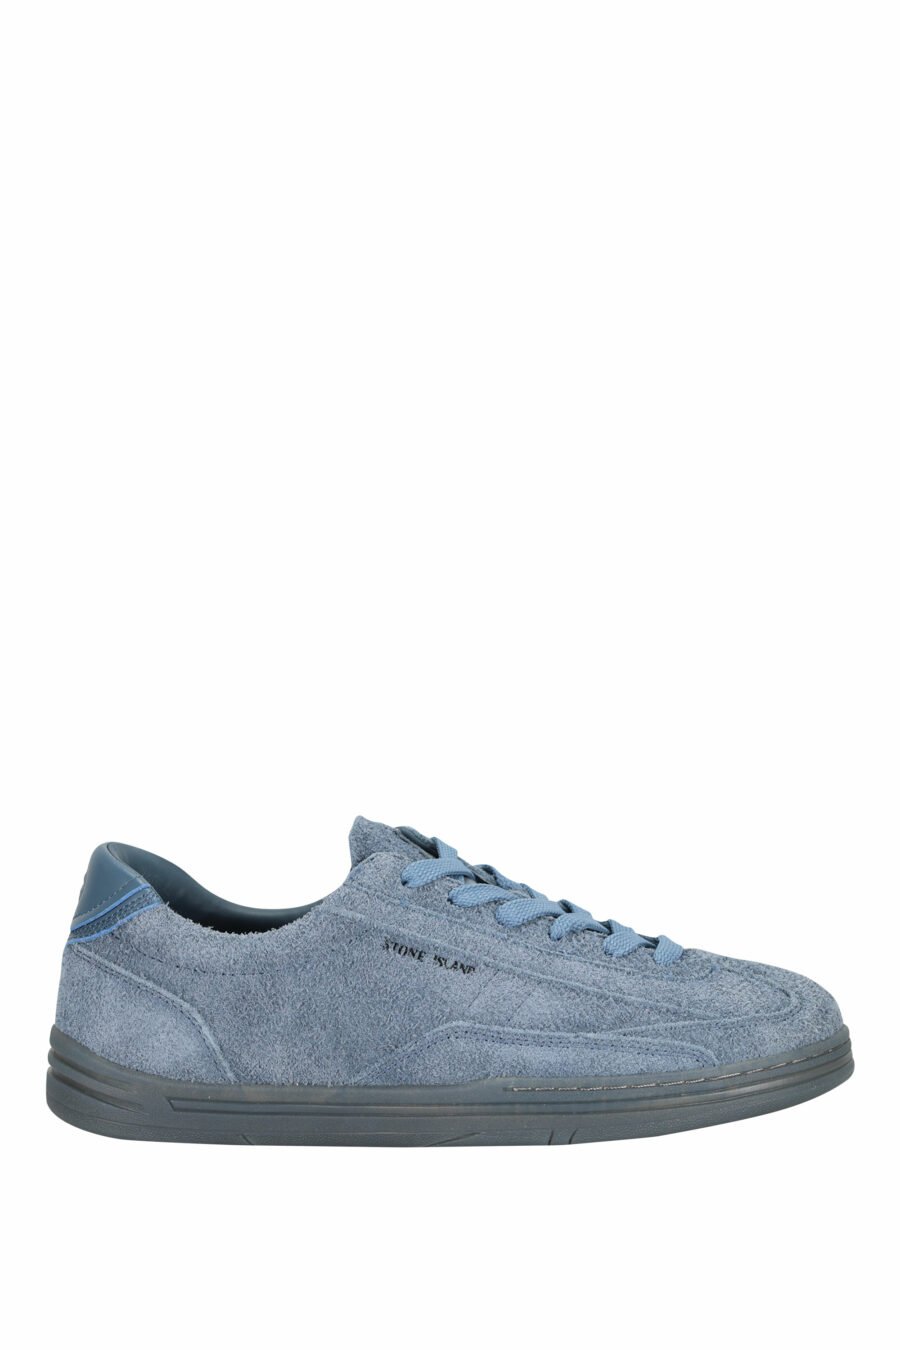 Dark blue trainers with minilogo and grey sole - 8052572937866